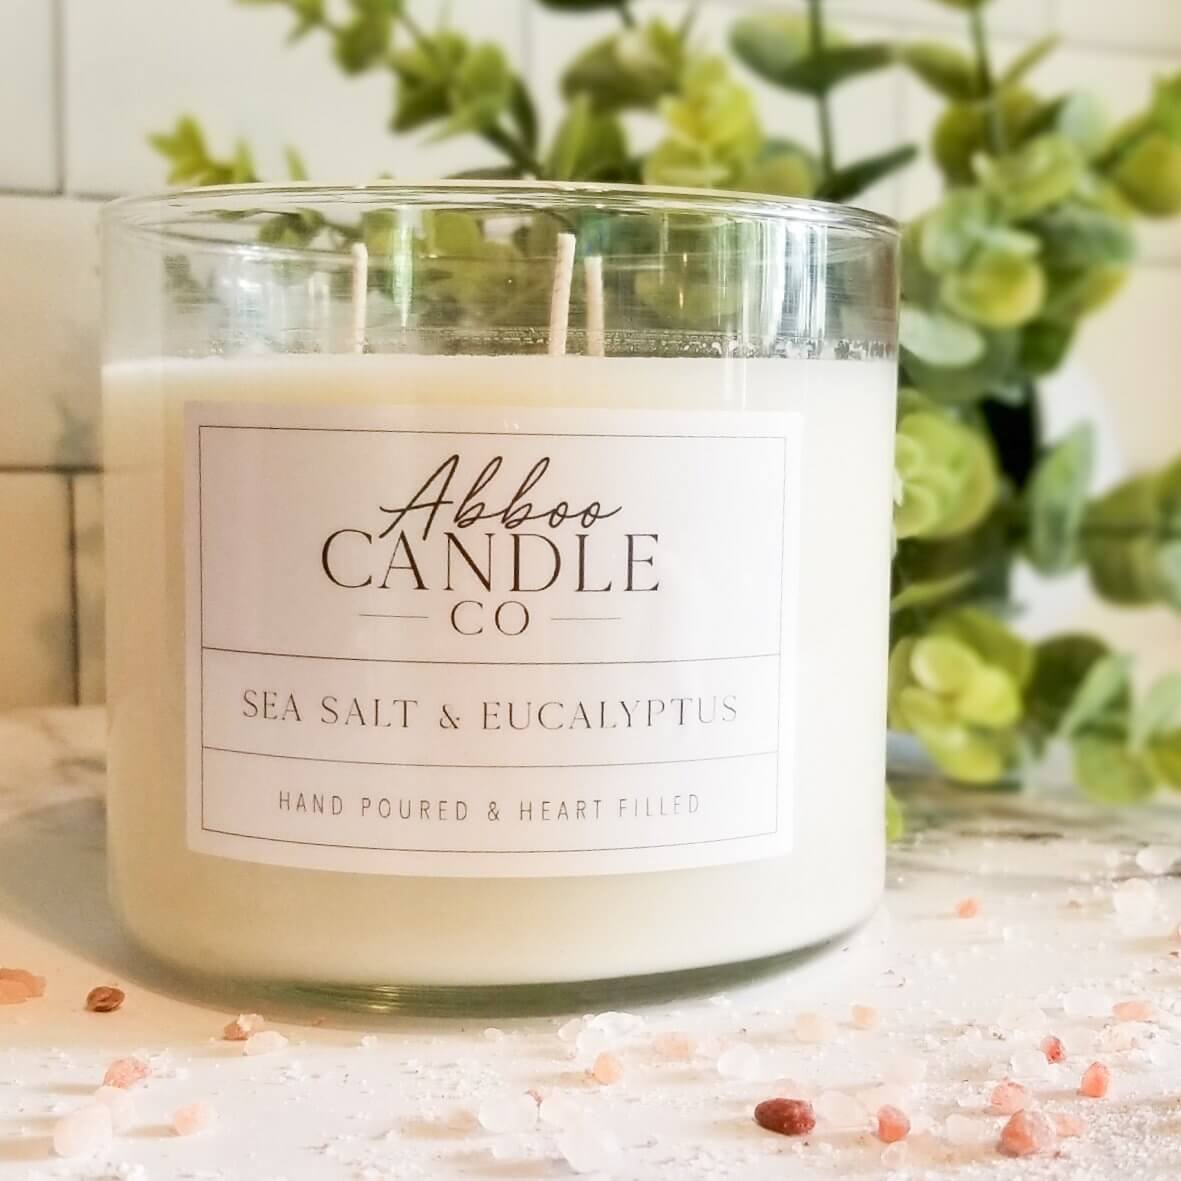 Sea Salt and Eucalyptus 3-Wick Soy Candle - Abboo Candle Co